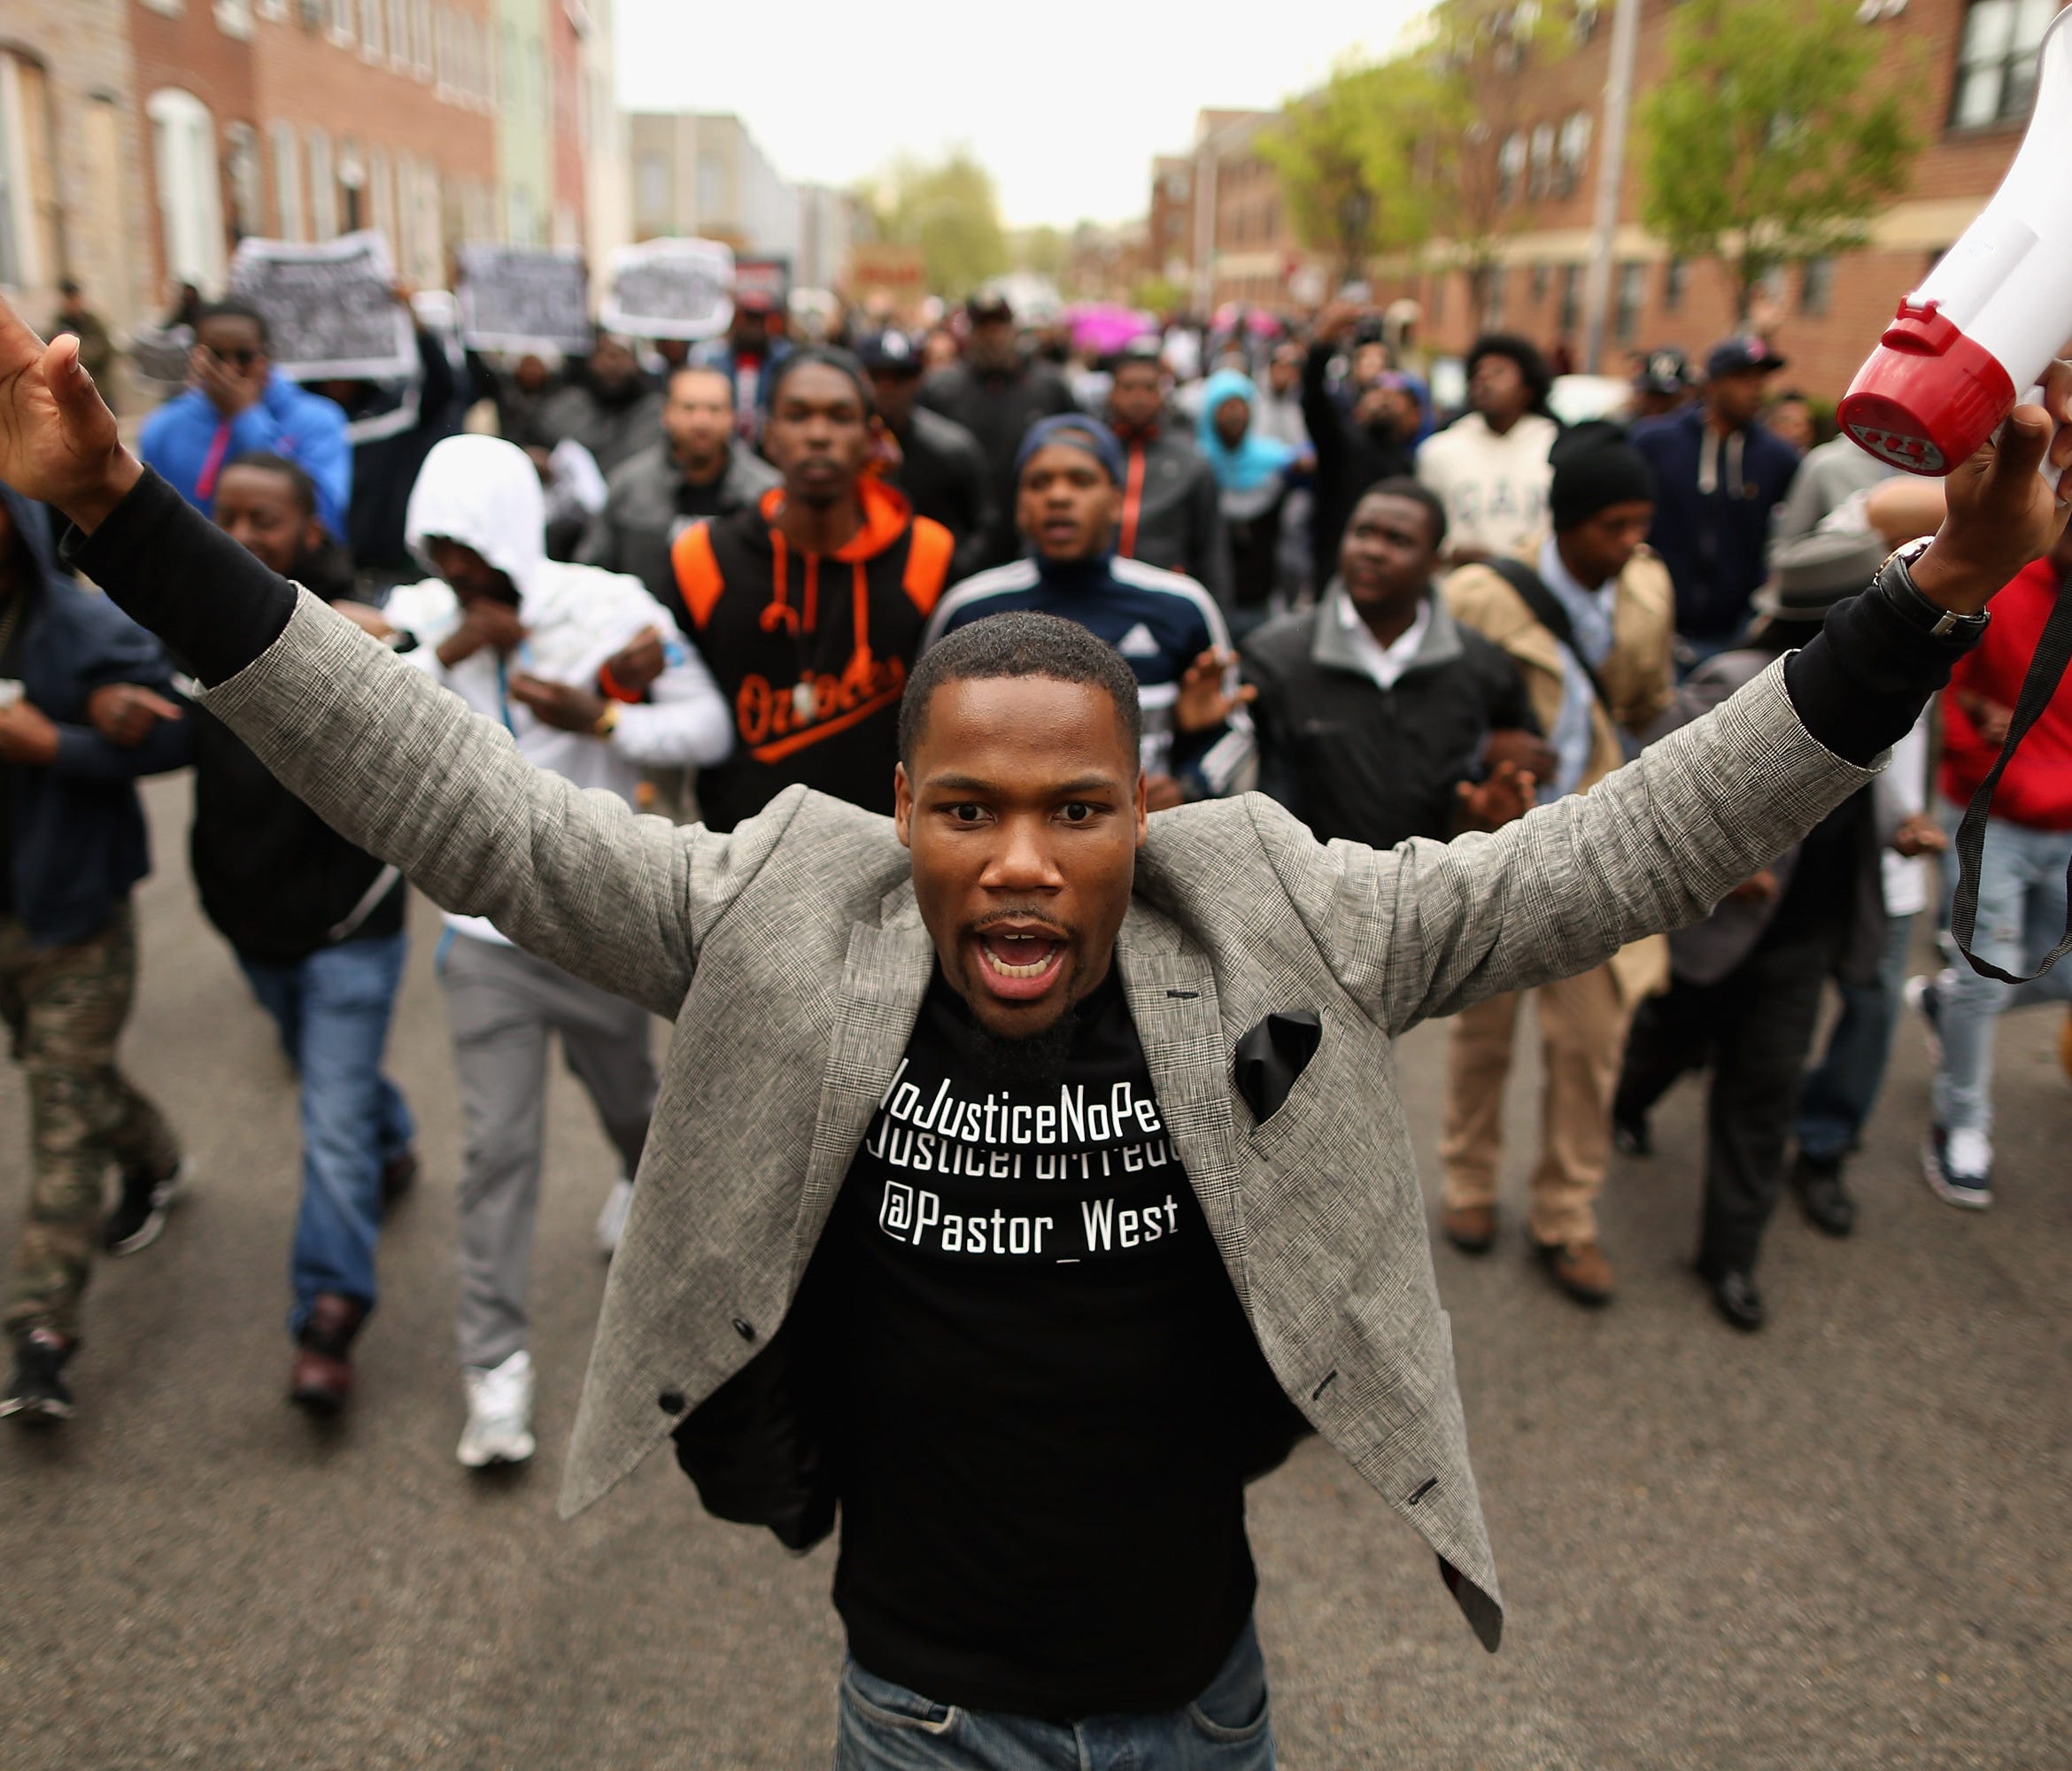 Hundreds of demonstrators march toward the  Baltimore Police Western District station during a protest against police brutality and the death of Freddie Gray in 2015.